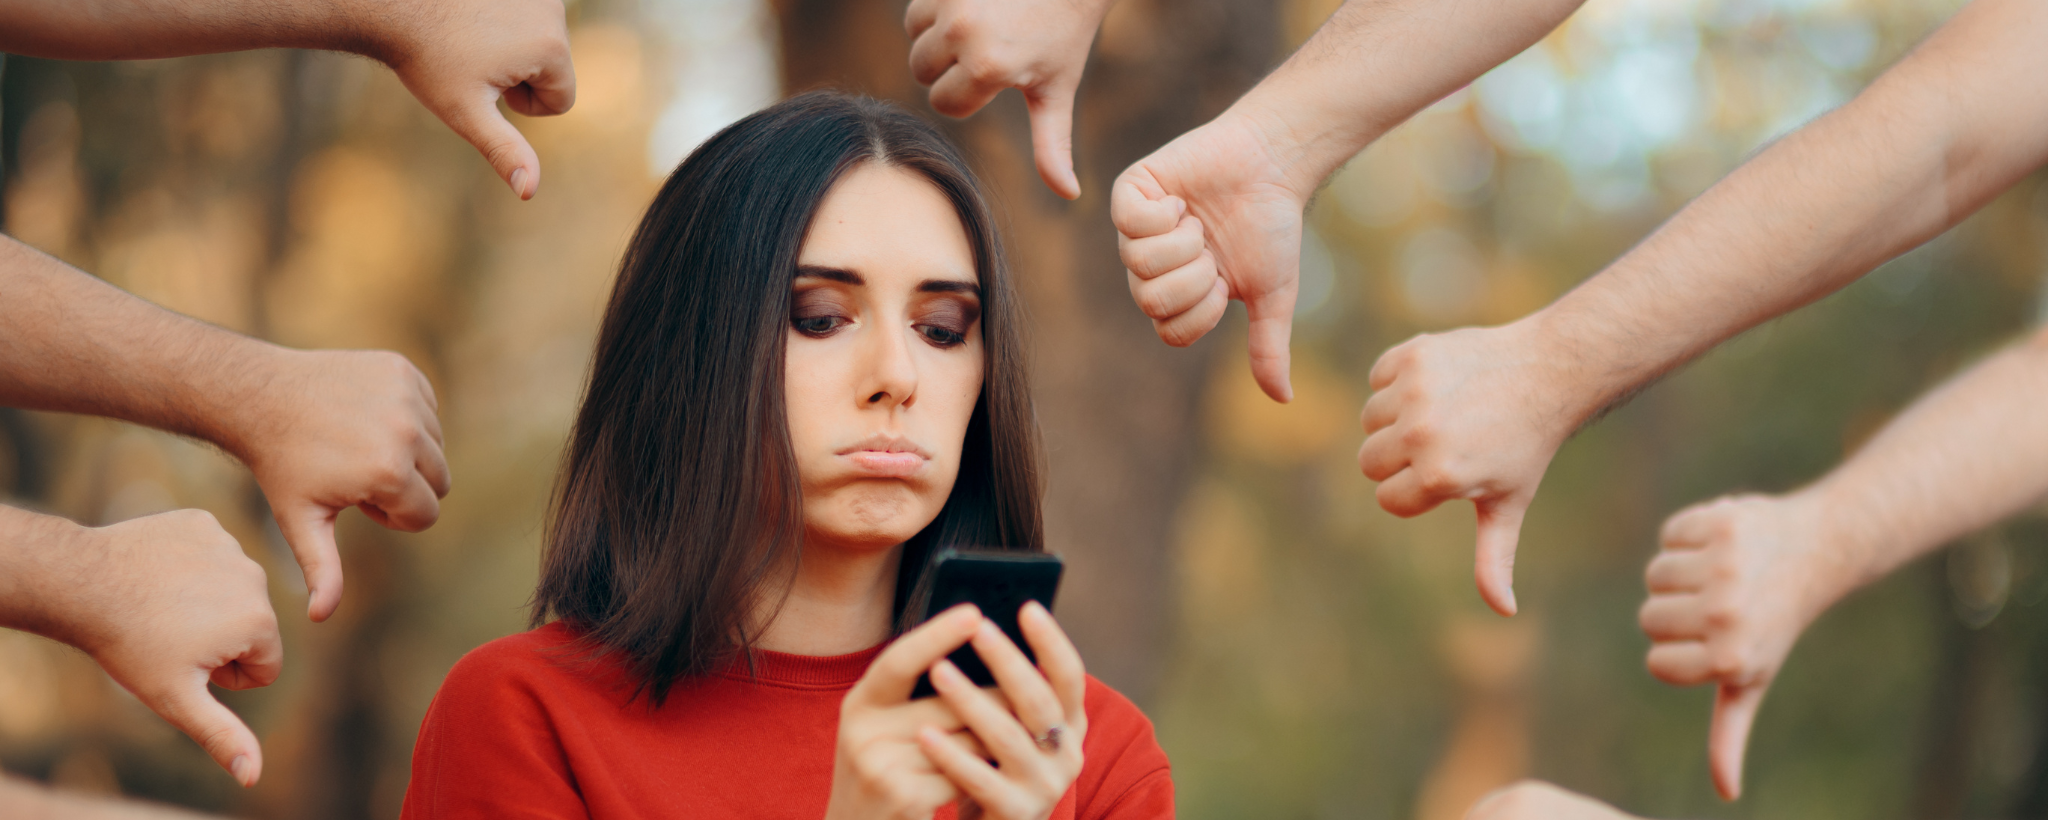 Lady looking sad with phone and lots of hands with thumbs down